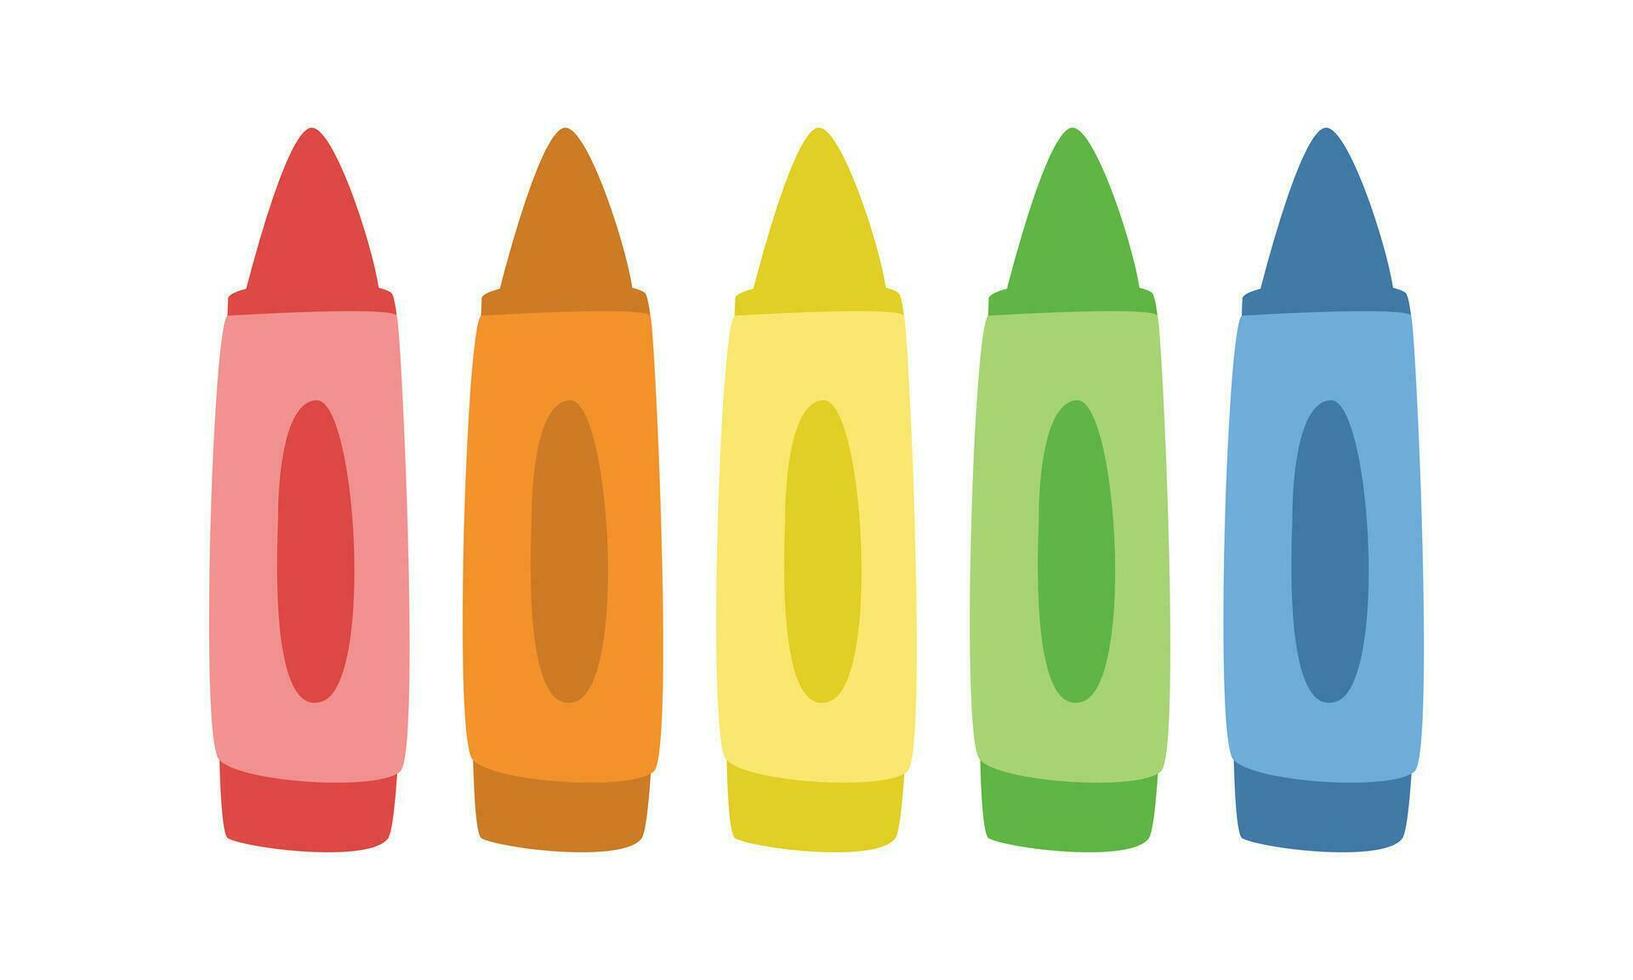 Colorful crayons clipart. Set of cute crayons flat vector illustration clipart cartoon style, hand drawn doodle. Students, classroom, school supplies, back to school concept